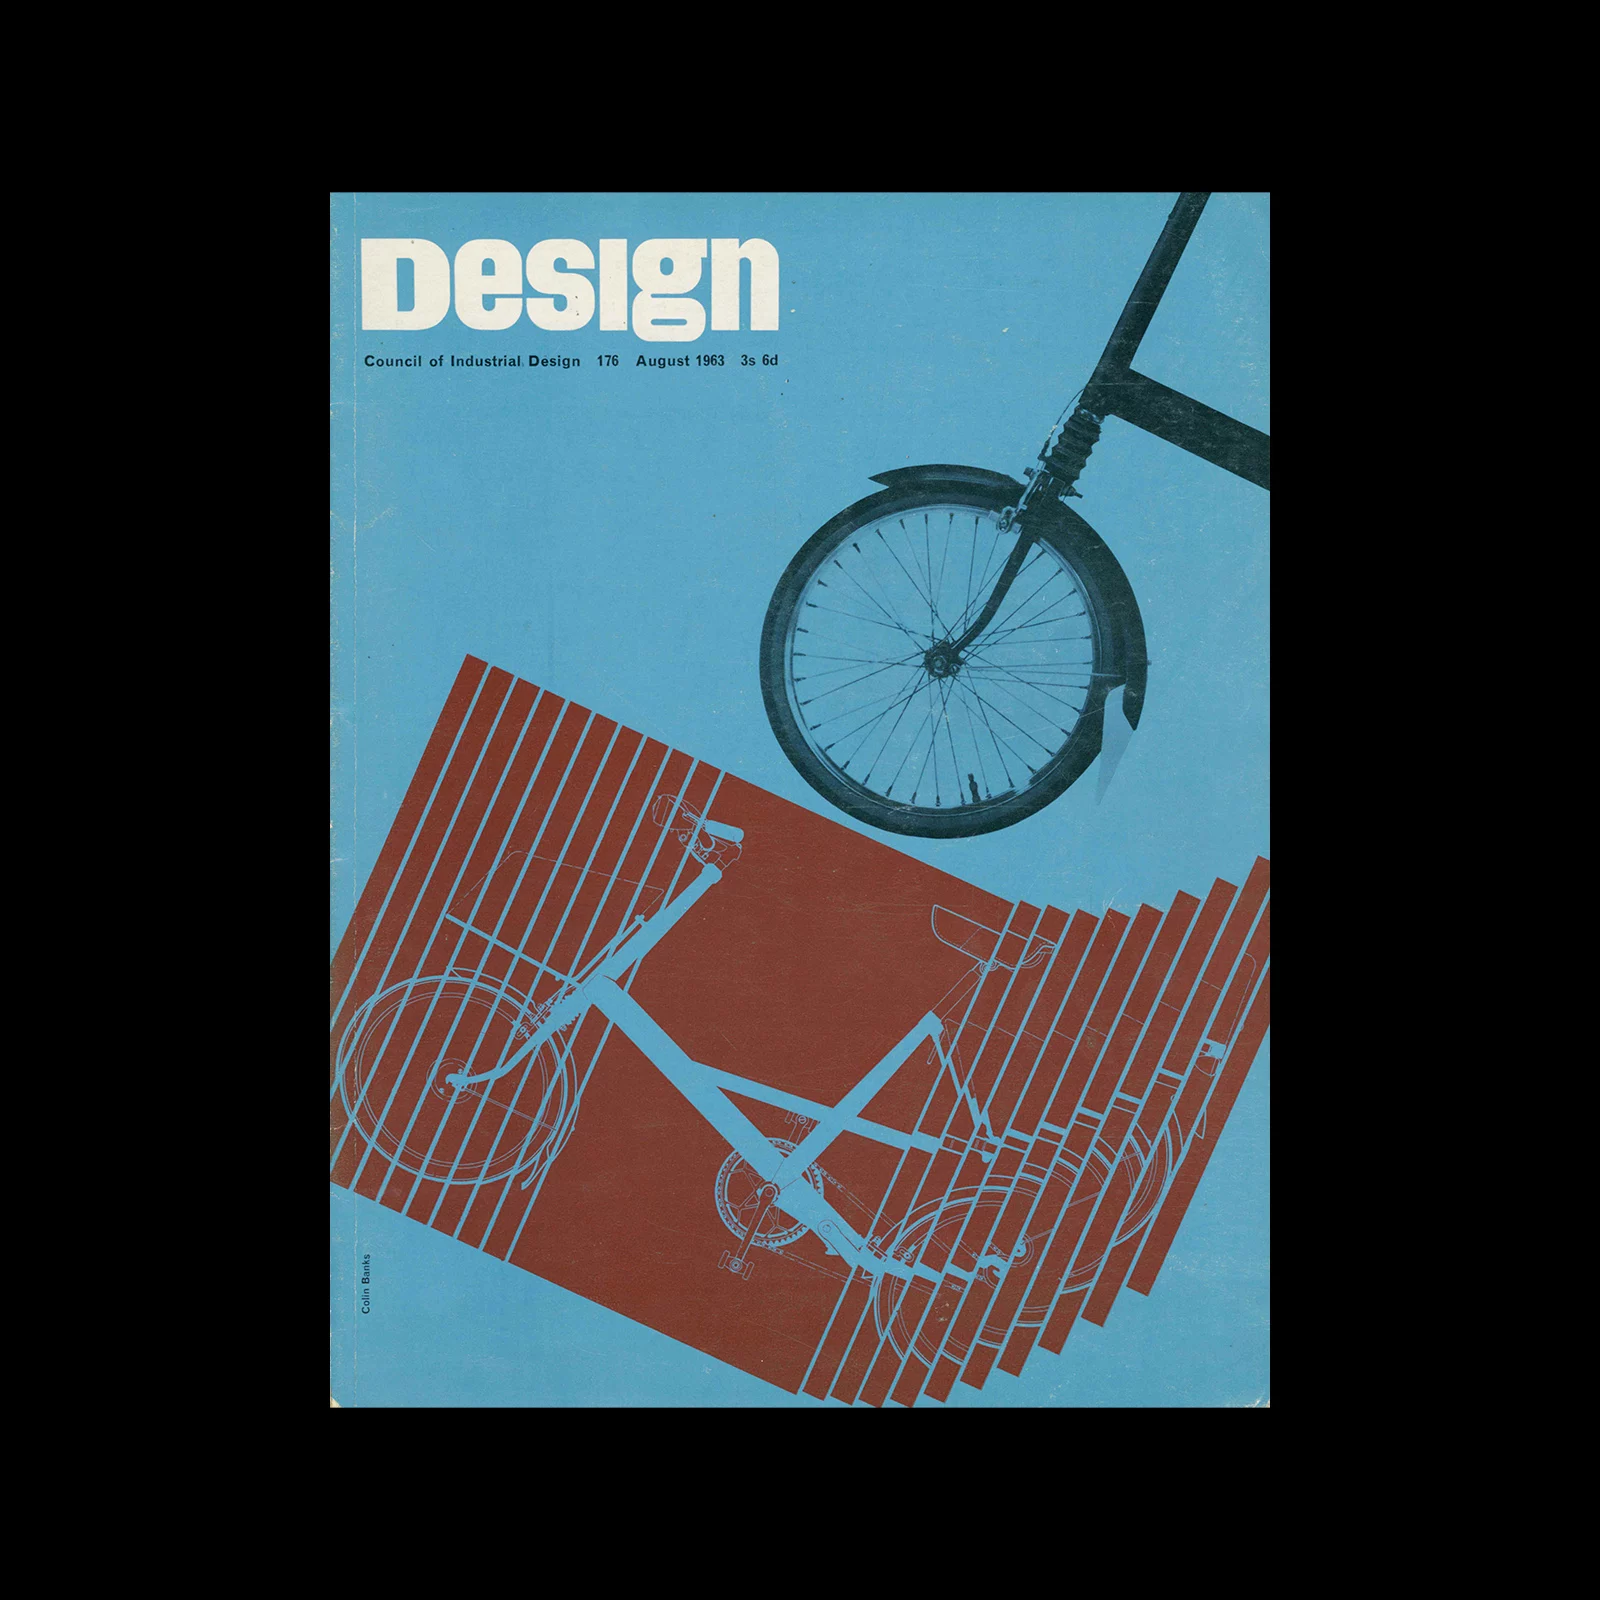 Design, Council of Industrial Design, 176, August 1963. Cover design by Colin Banks